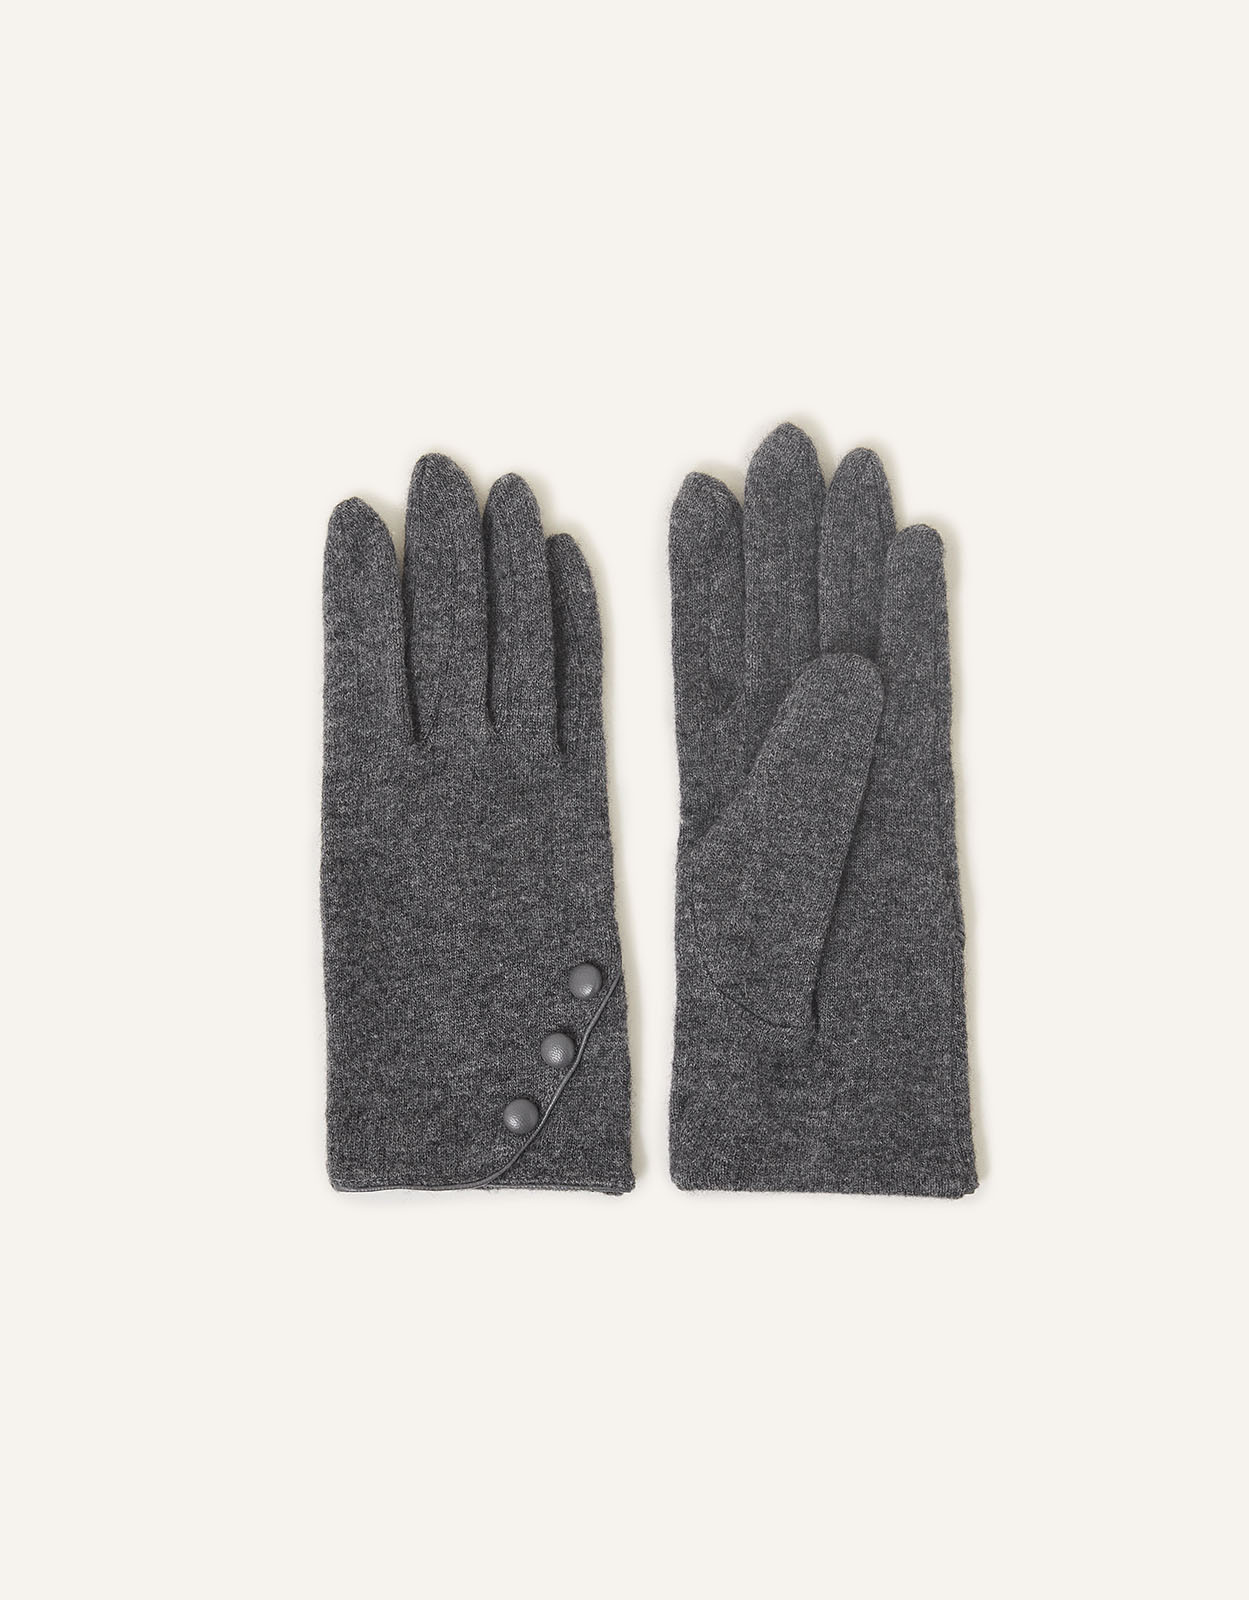 Accessorize Grey Luxurious Pure Wool Button Gloves, Size: S / M